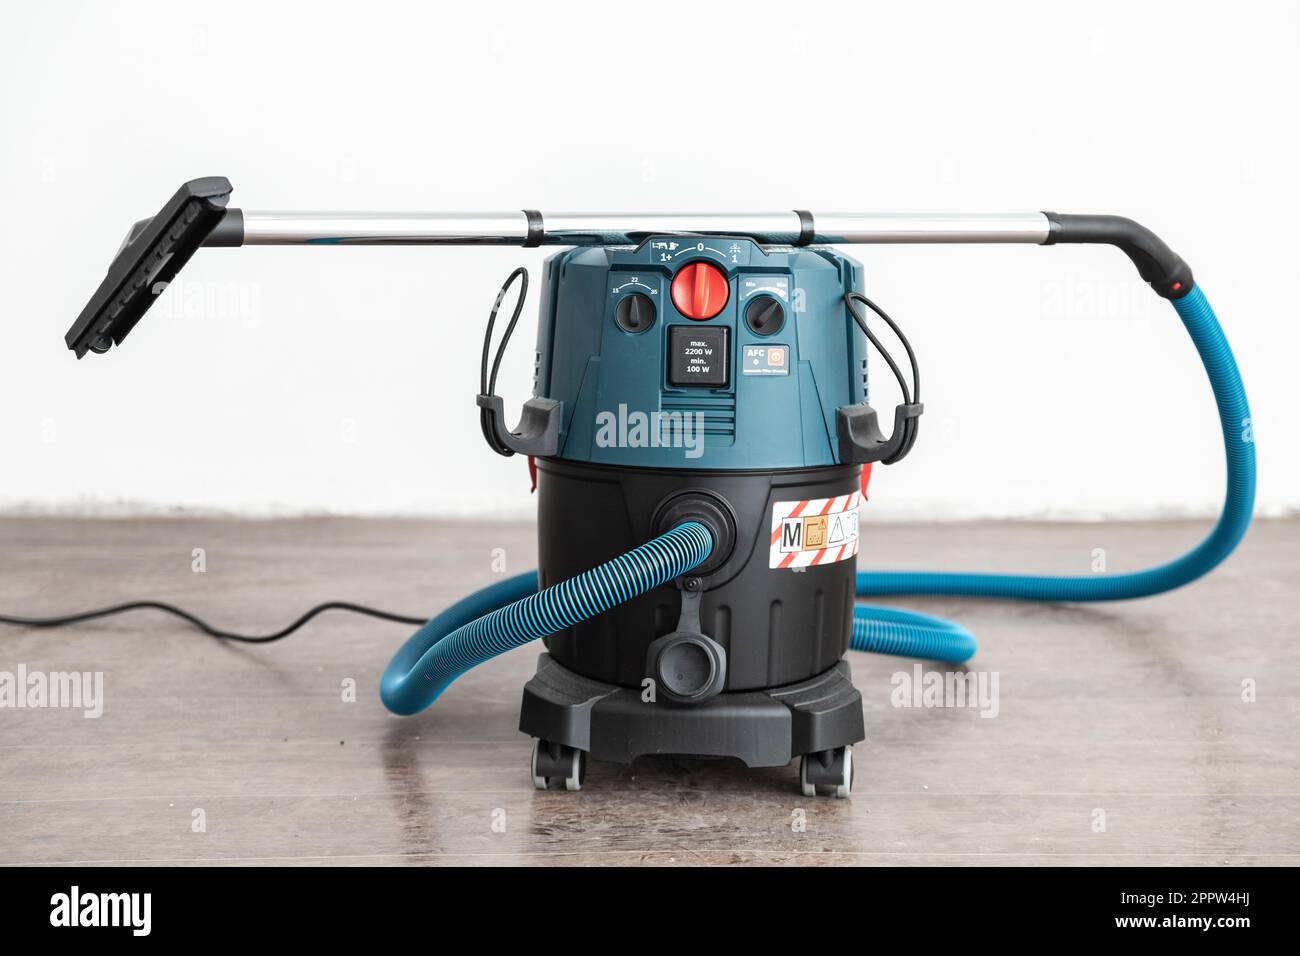 https://c8.alamy.com/comp/2PPW4HJ/bosch-professional-construction-vacuum-cleaner-in-an-empty-room-ready-for-use-2PPW4HJ.jpg